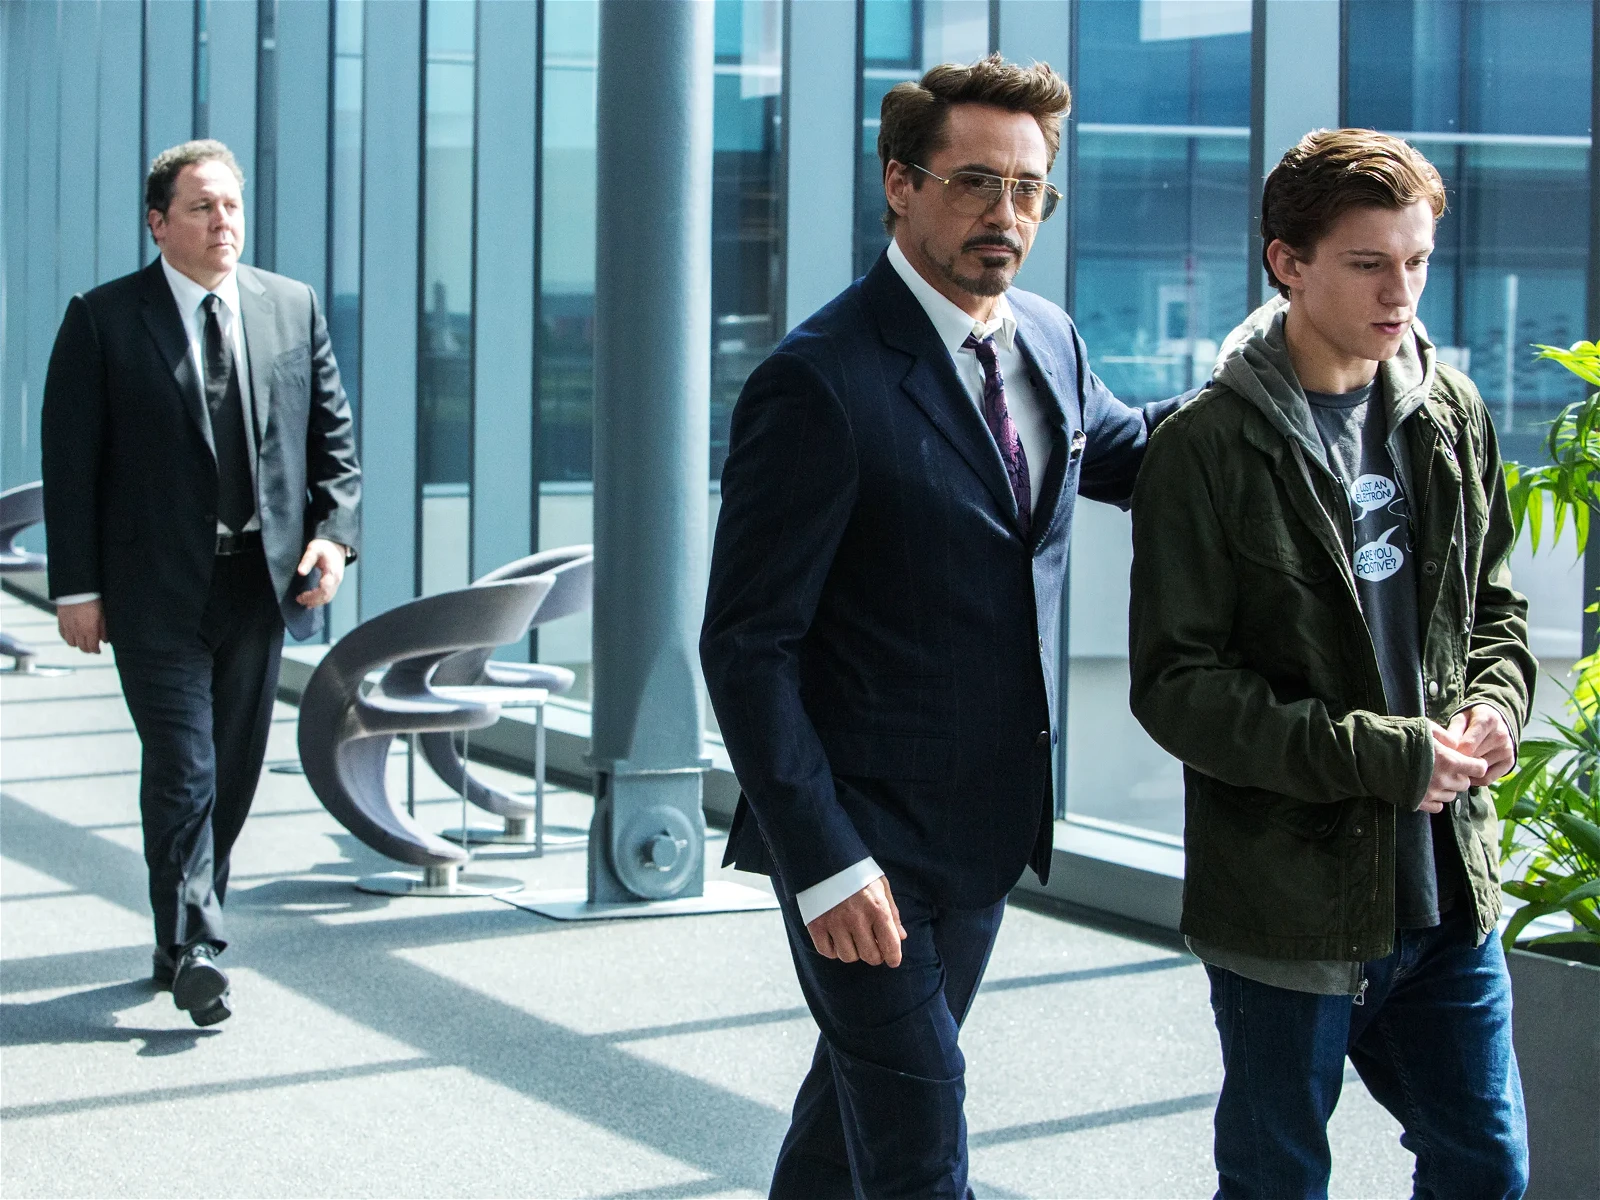 Robert Downey Jr. and Tom Holland as Tony Stark and Spider-Man